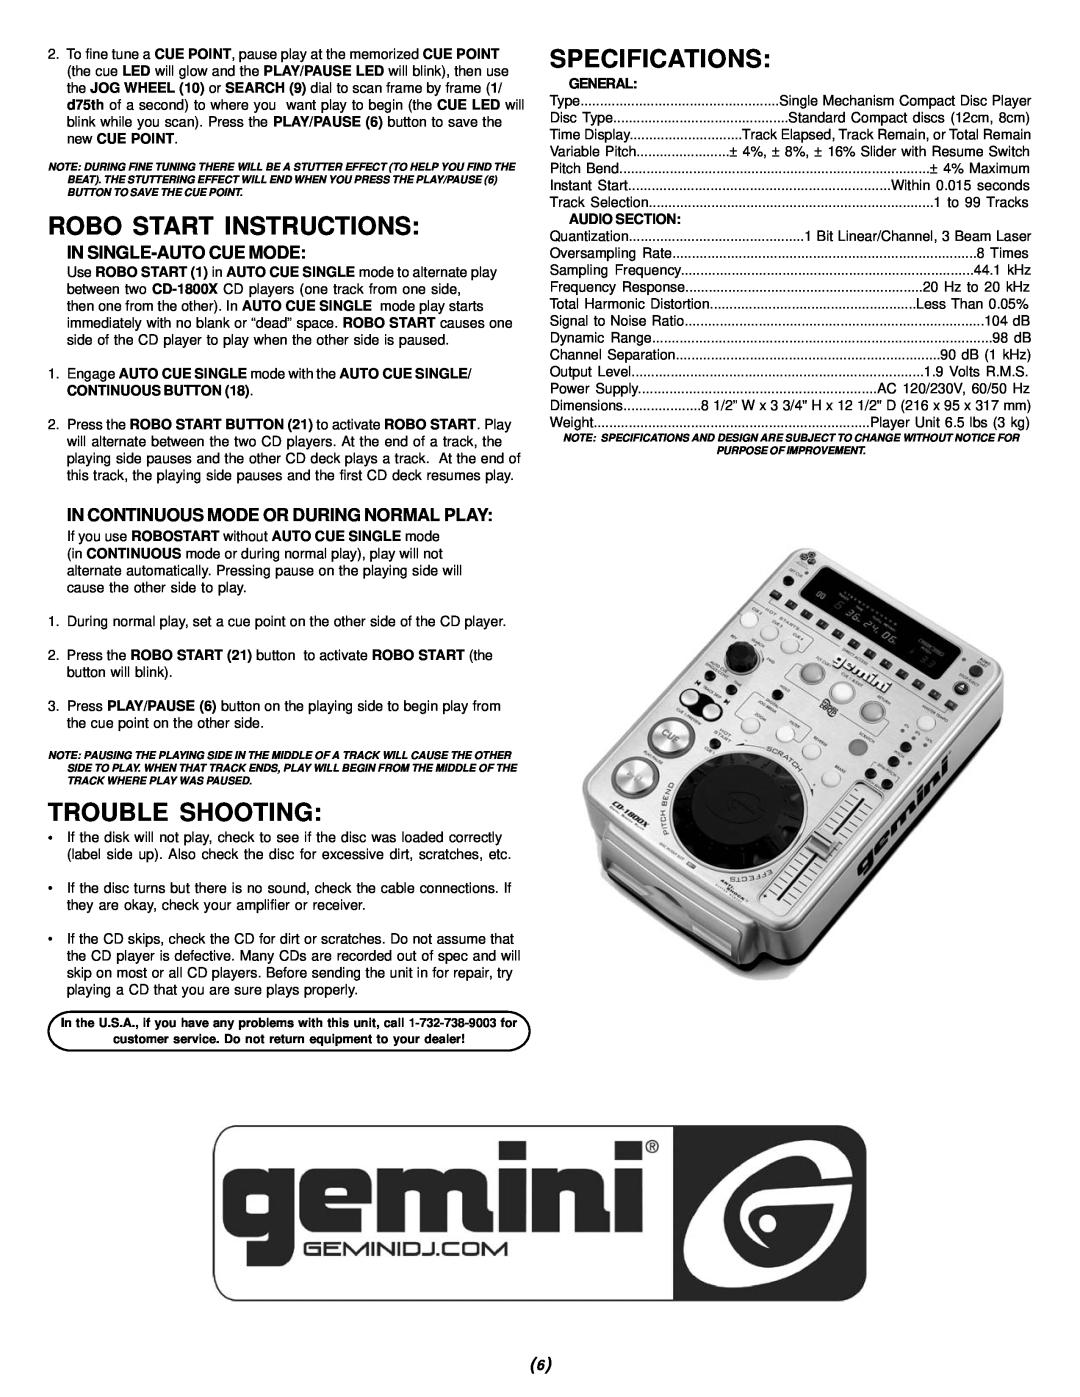 Gemini CD-1800X Robo Start Instructions, Trouble Shooting, Specifications, In Single-Autocue Mode, General, Audio Section 